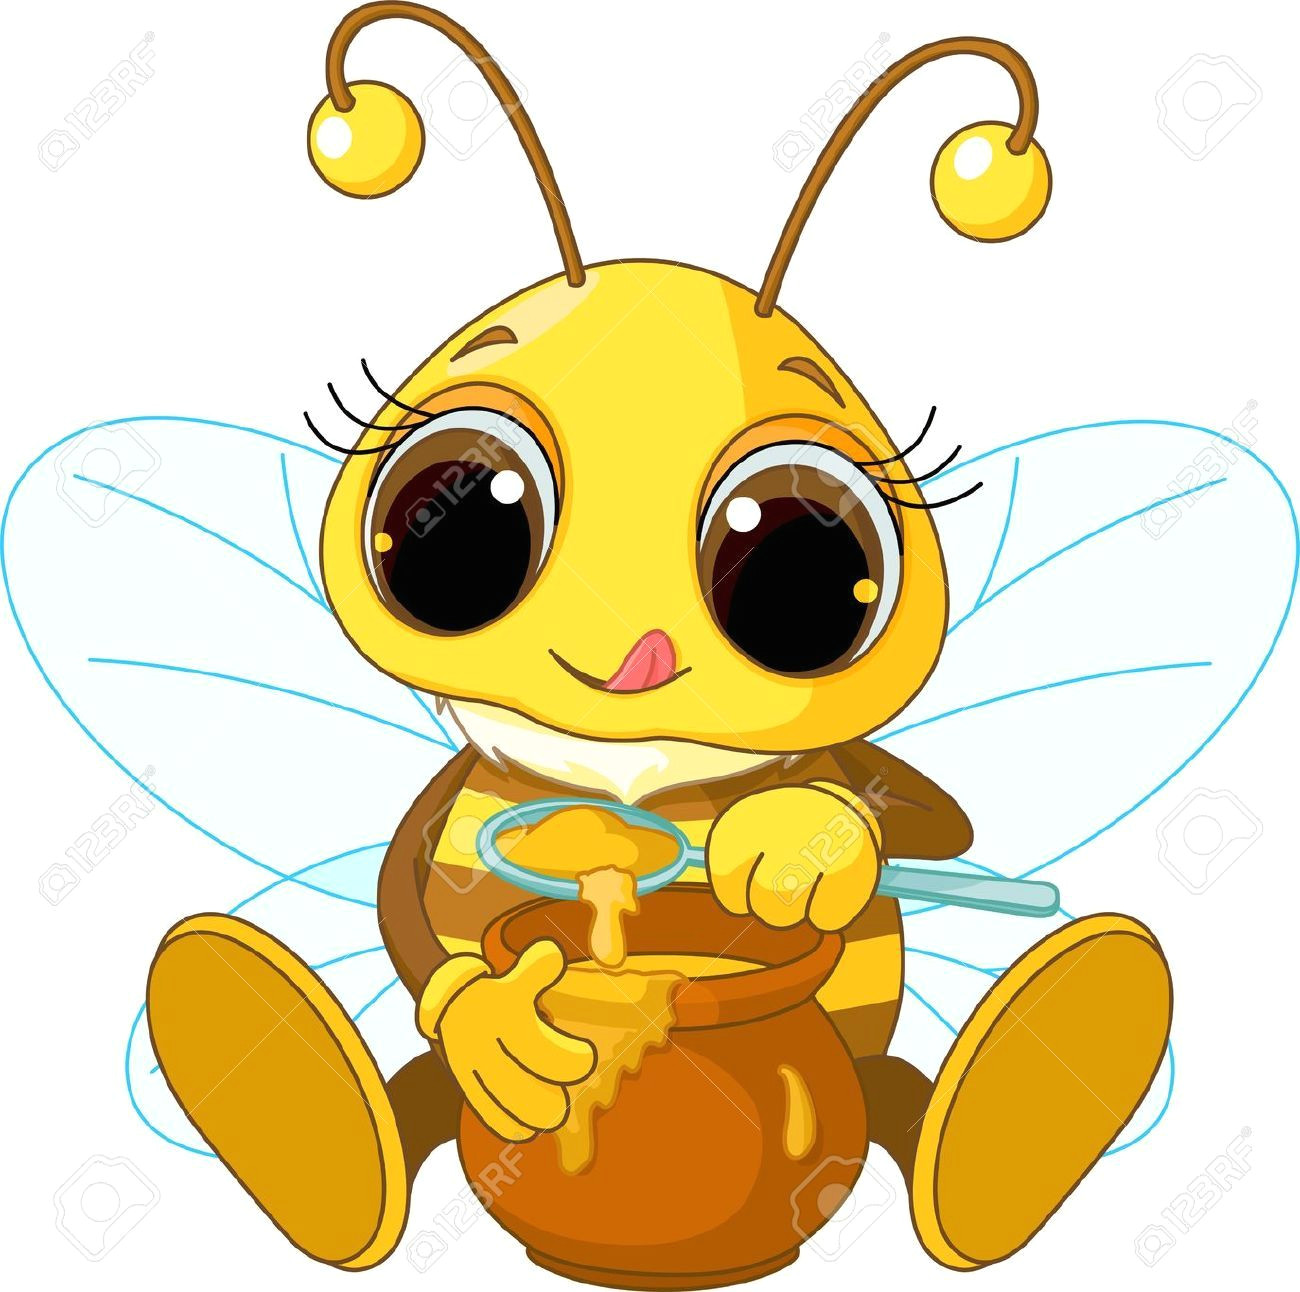 Cartoon Drawing Of A Queen Bee Illustration Of Cute Bee Eating Honey Royalty Free Cliparts